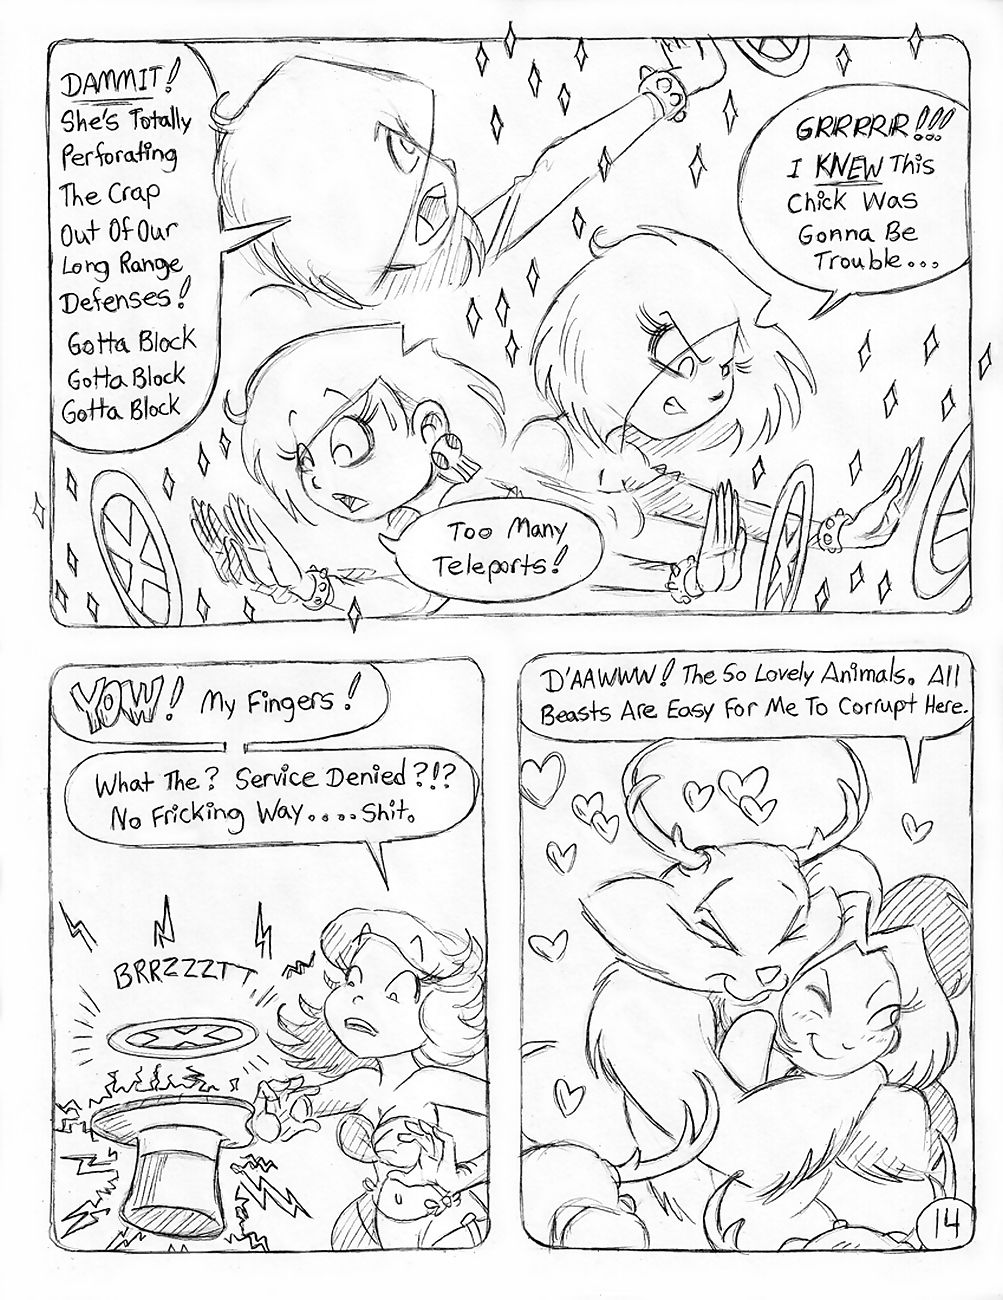 VaVoom - part 6 page 1